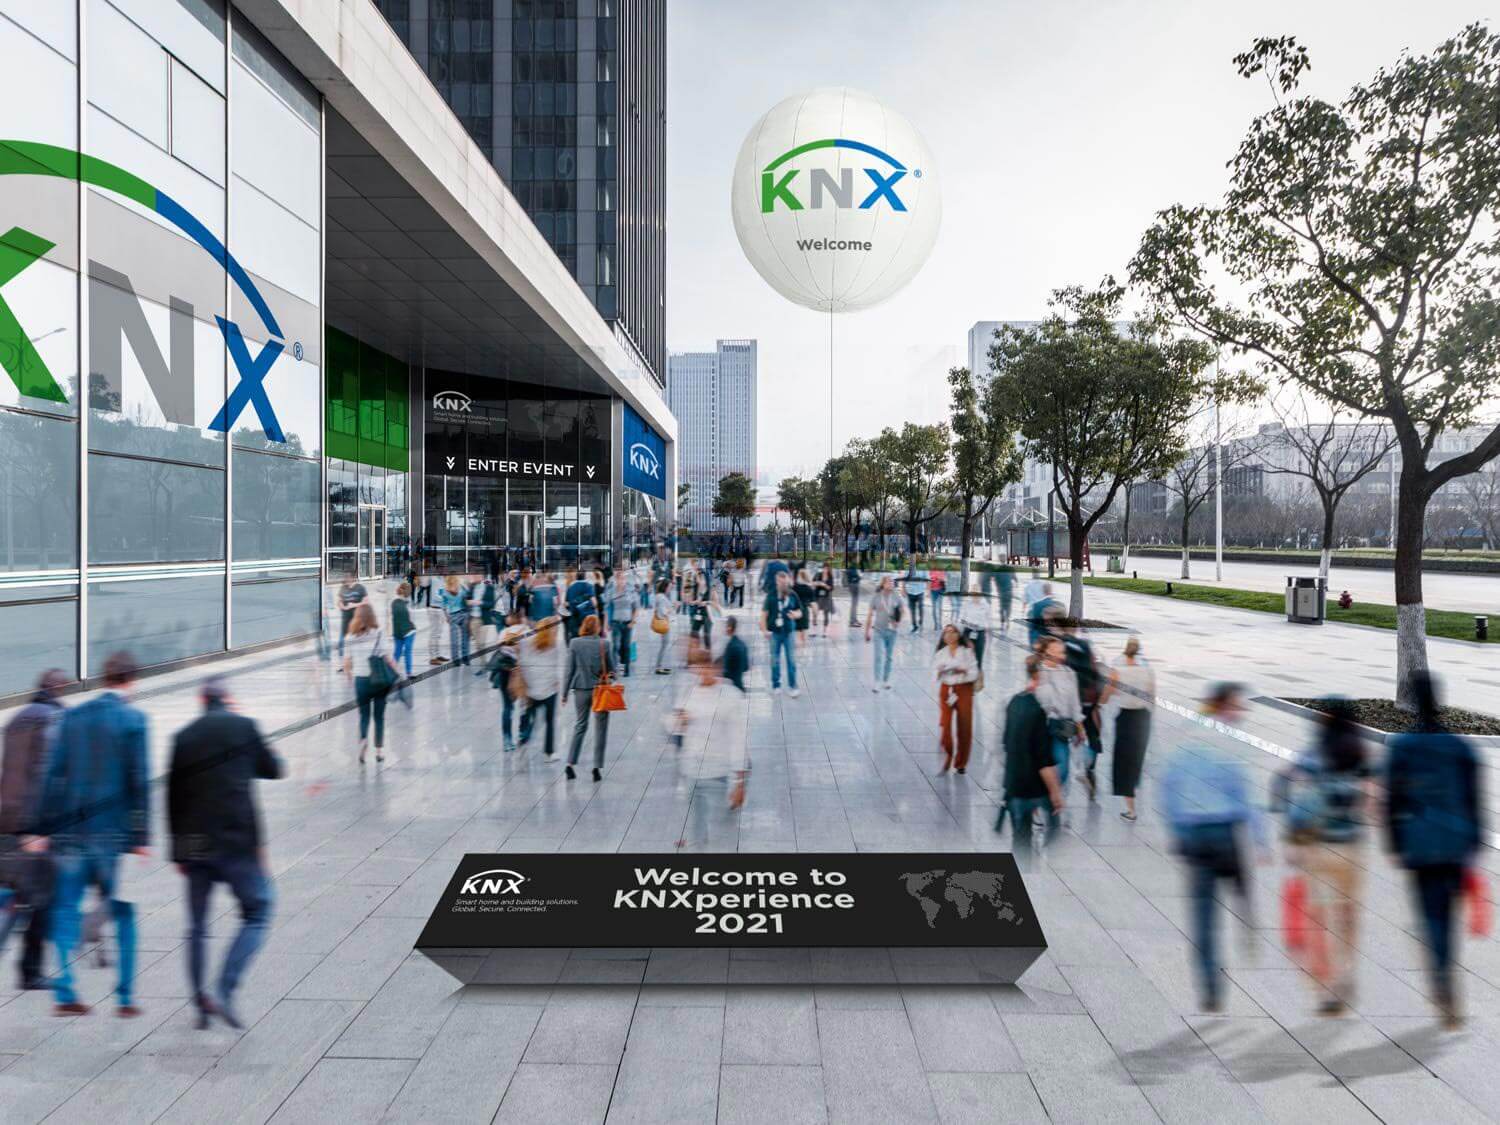 KNXperience trade show: the latest technology for your home automation system